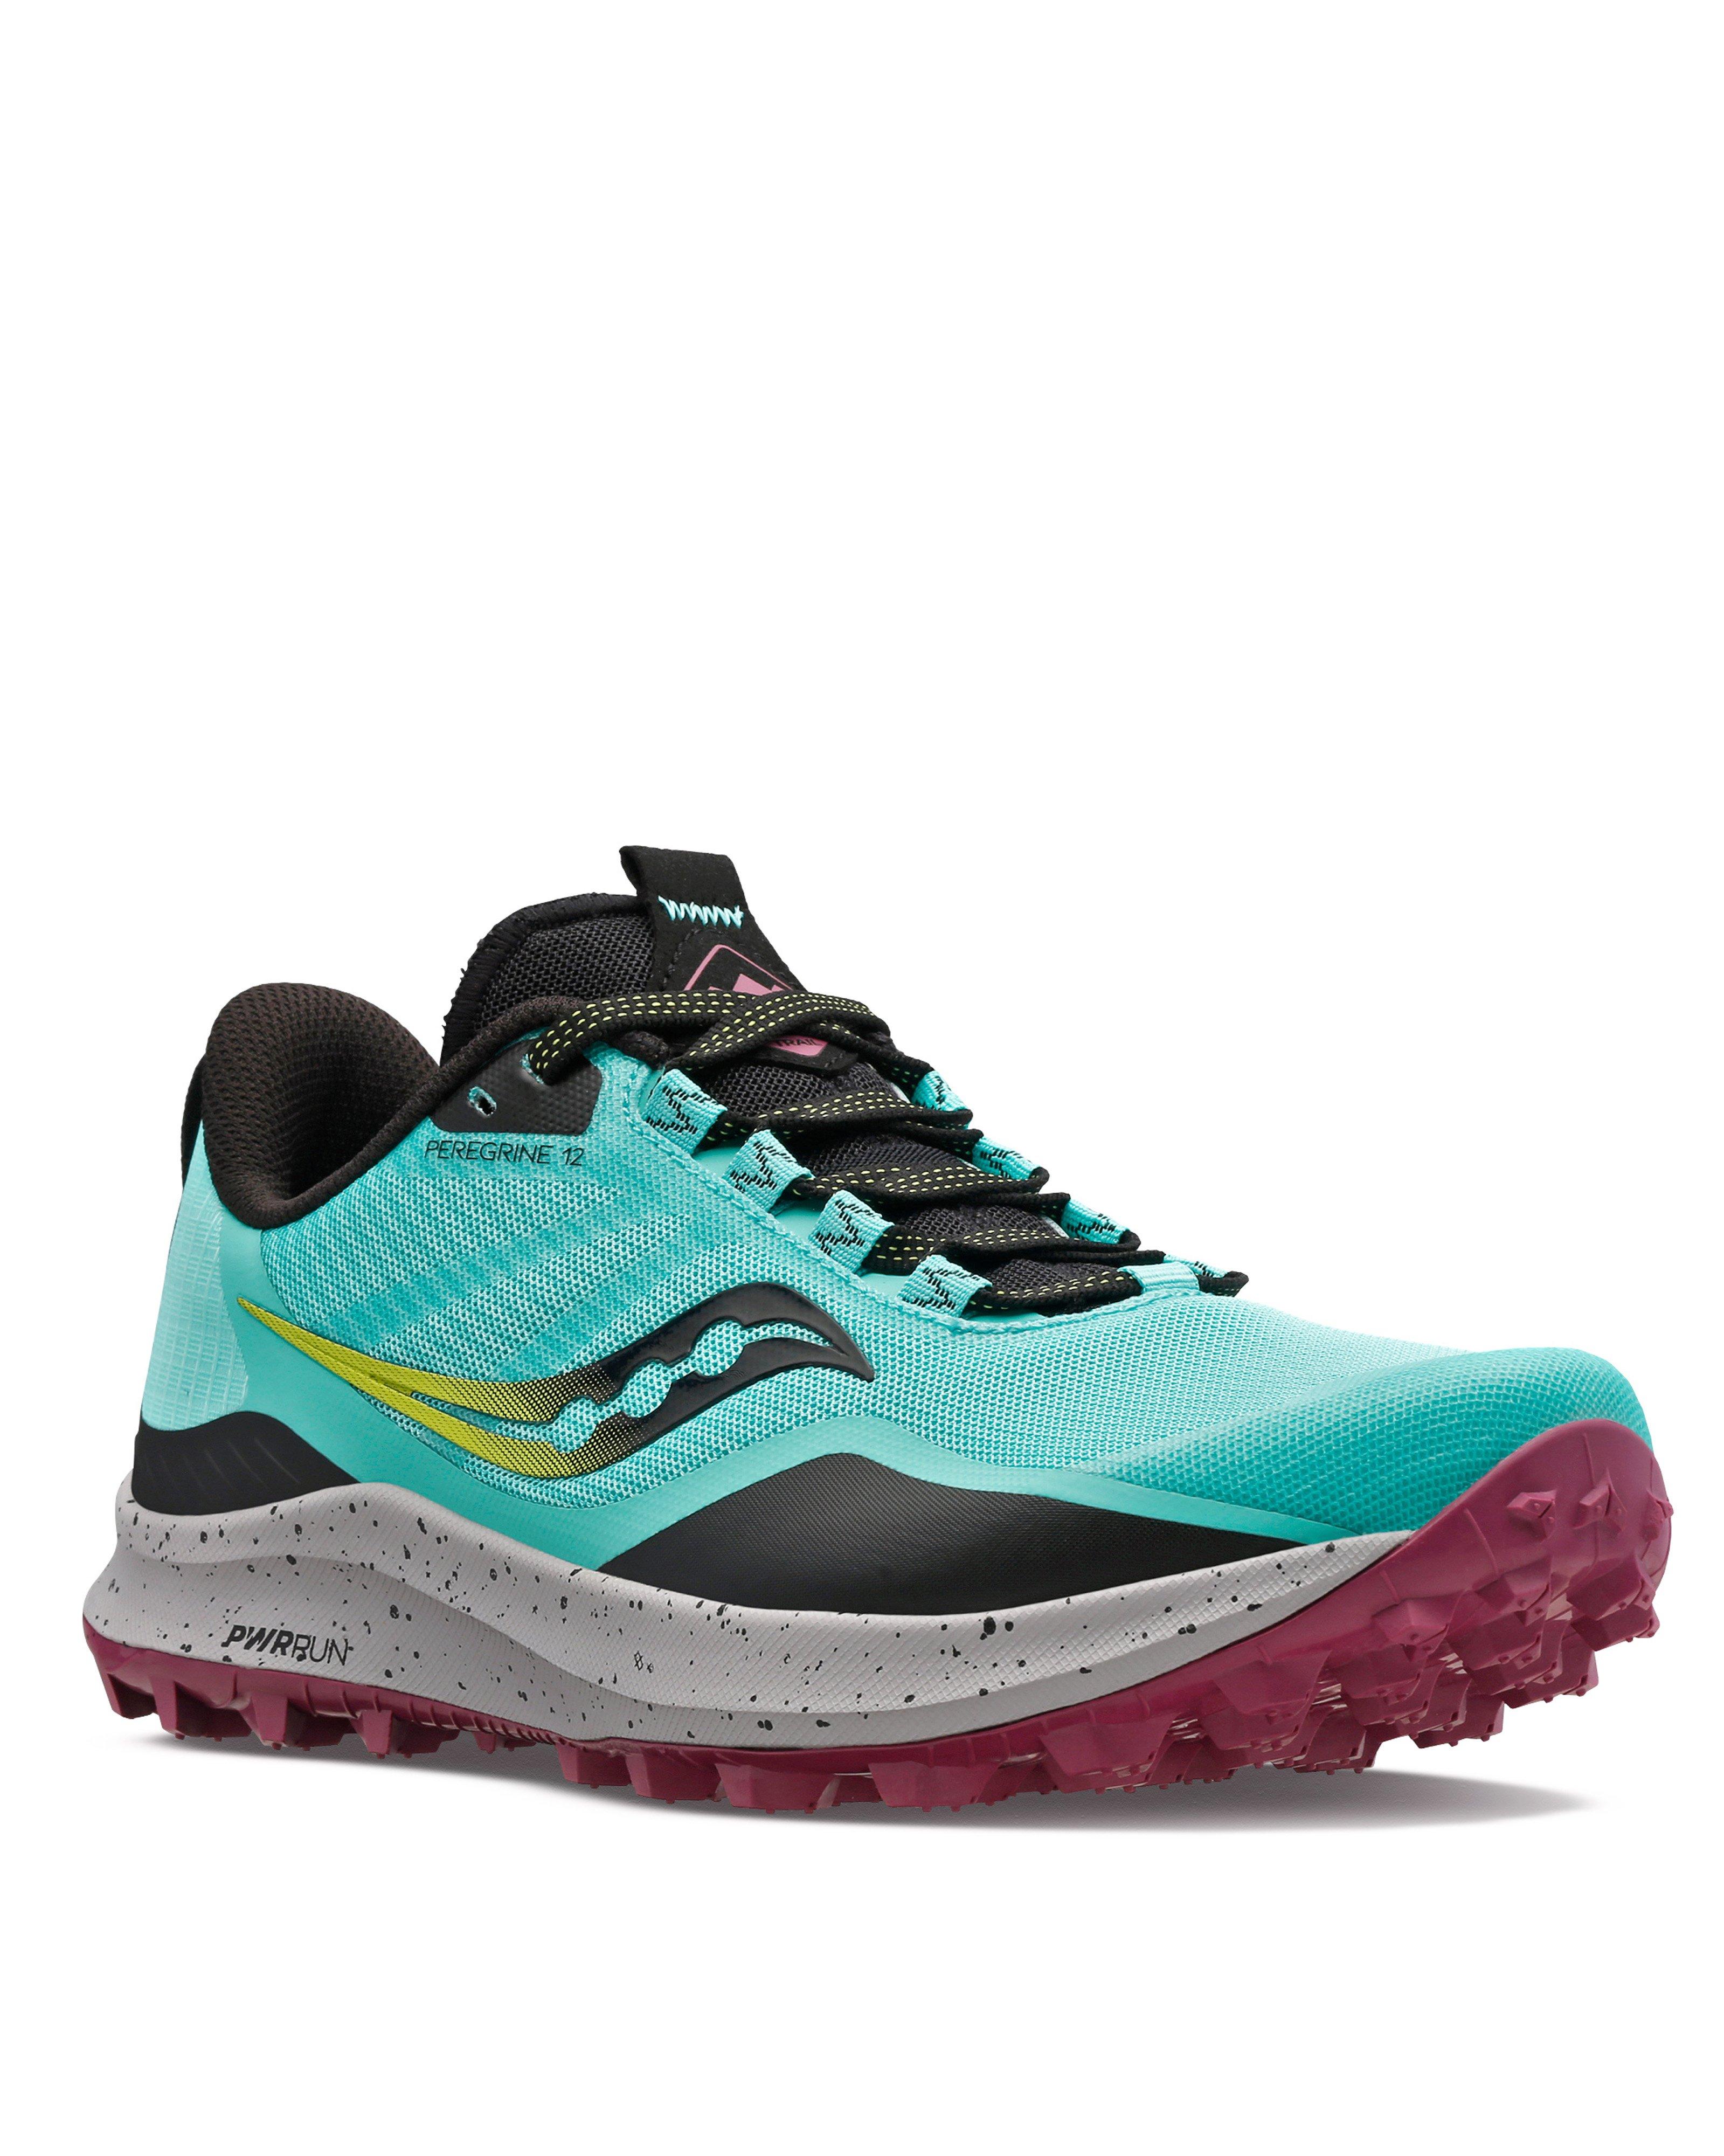 Saucony Women's Peregrine 12 Trail Running Shoes | Cape Union Mart